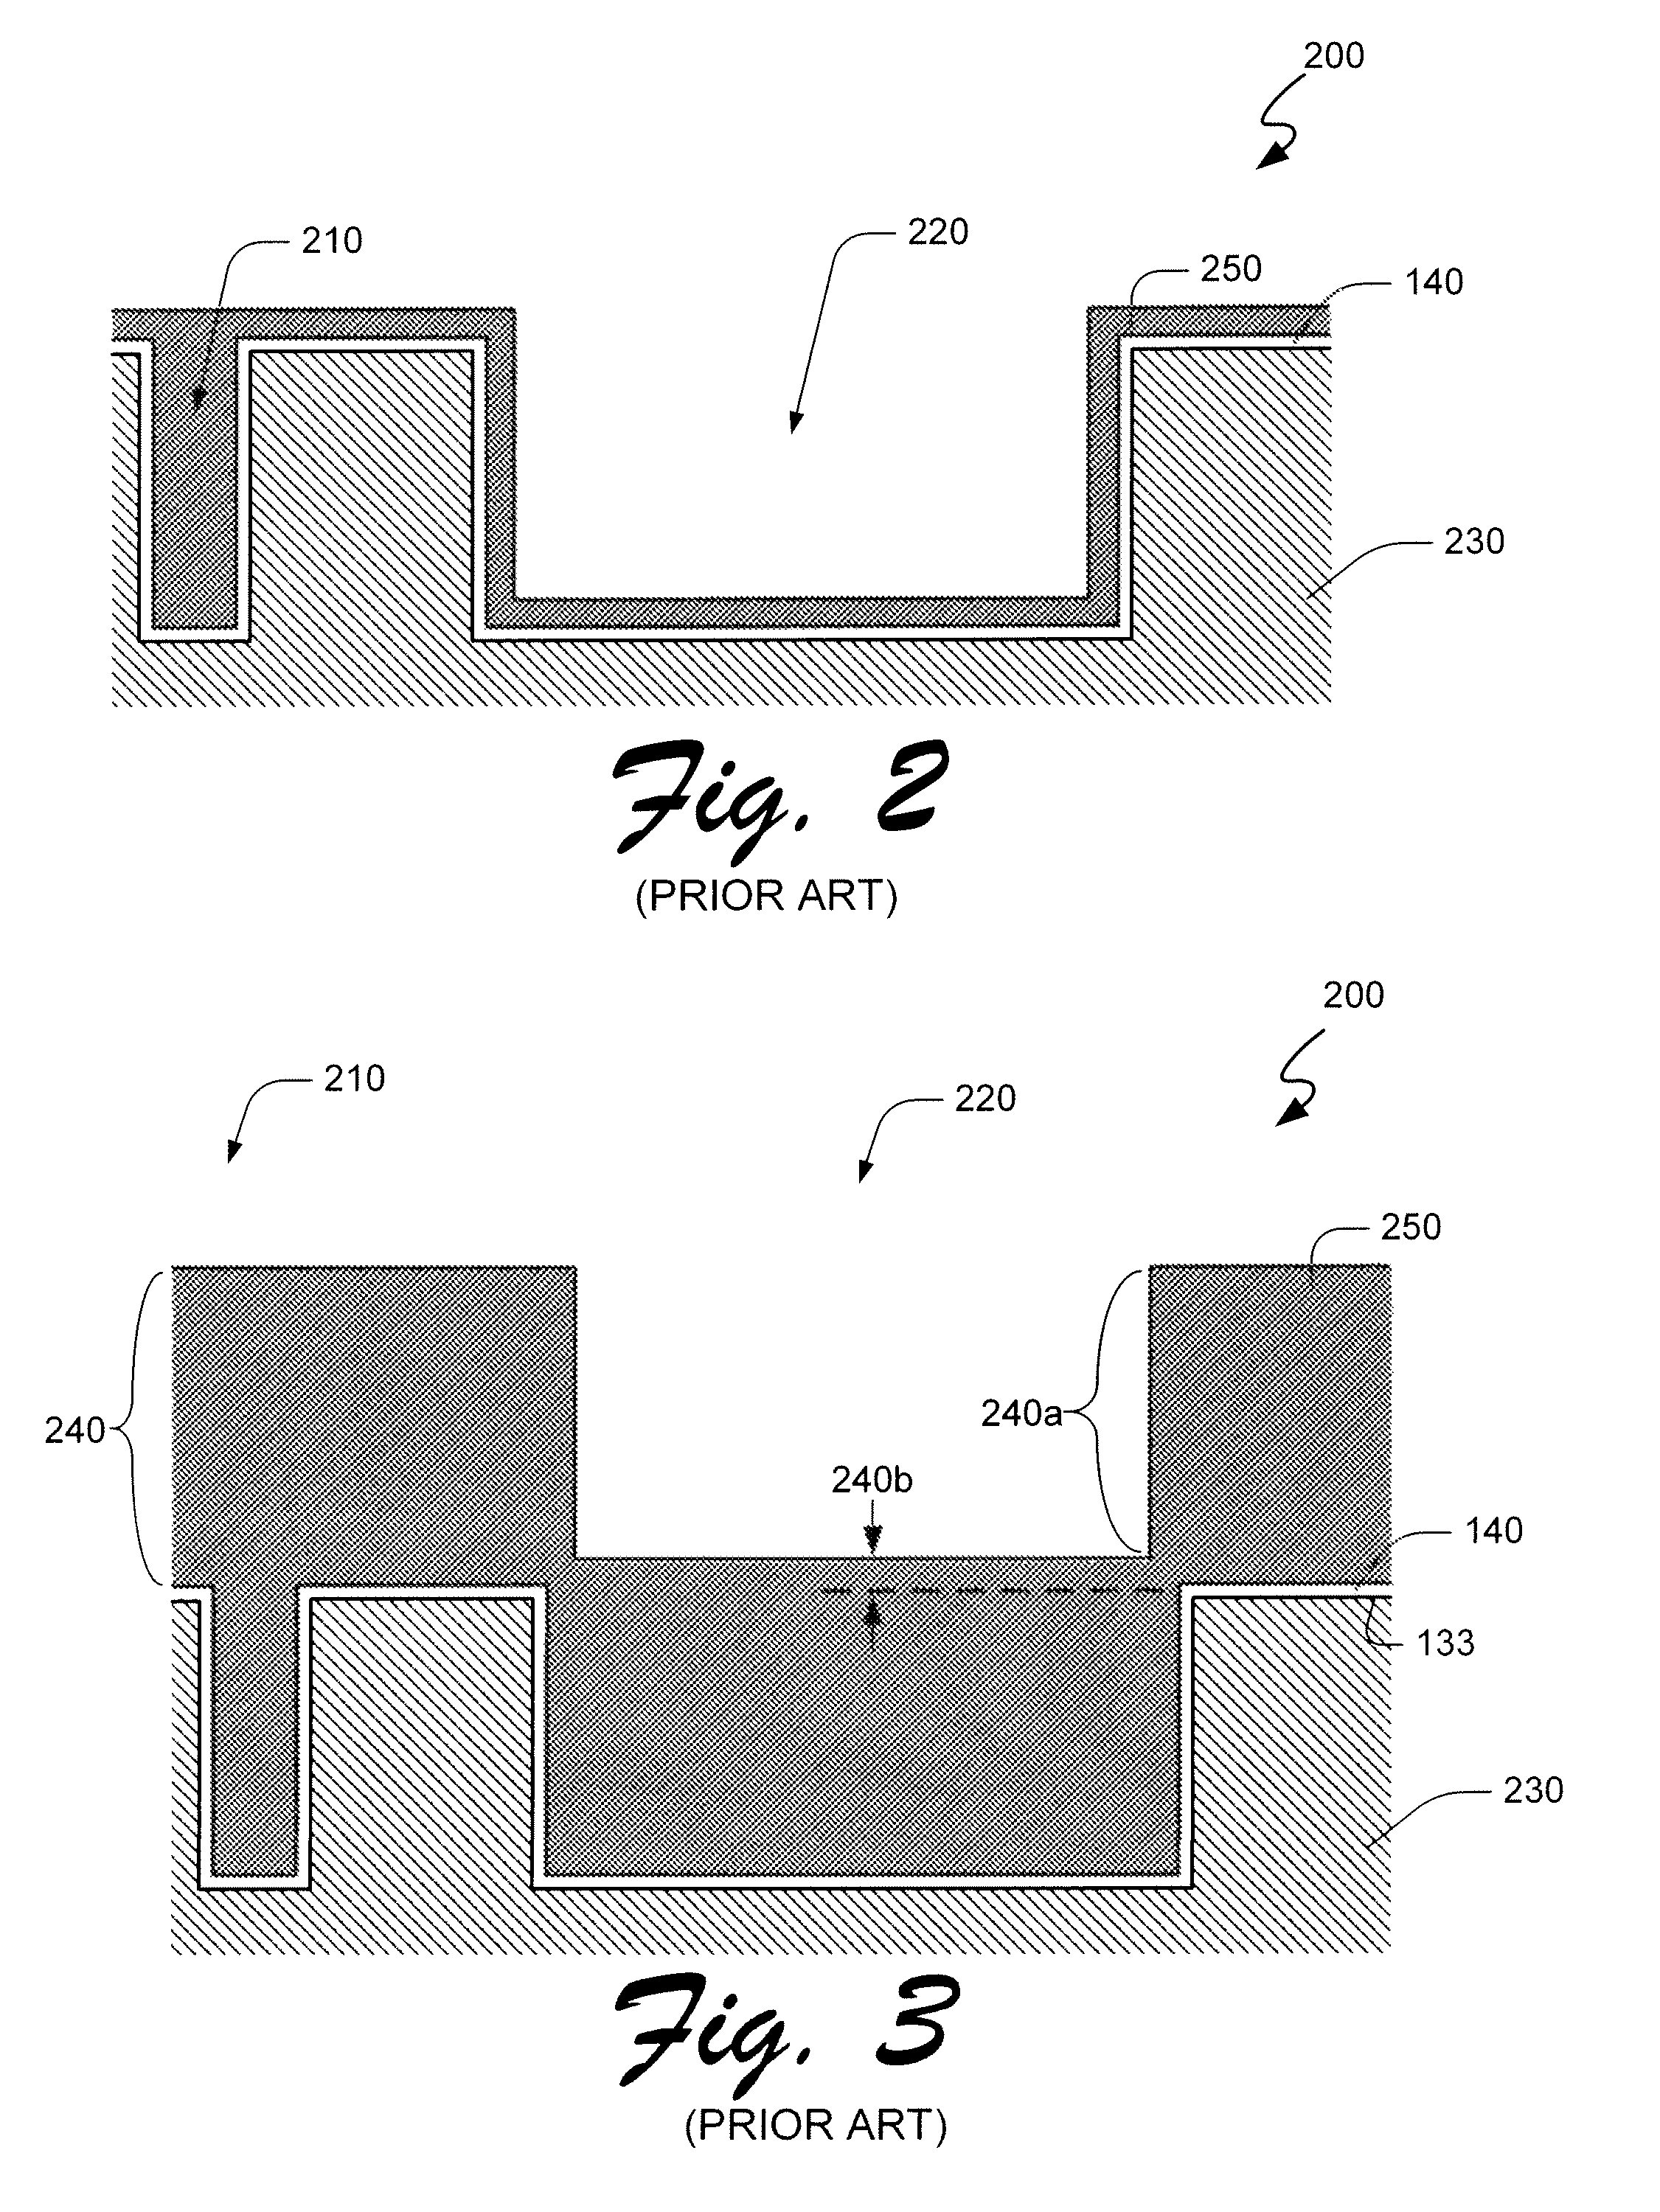 Method and apparatus for 3D interconnect